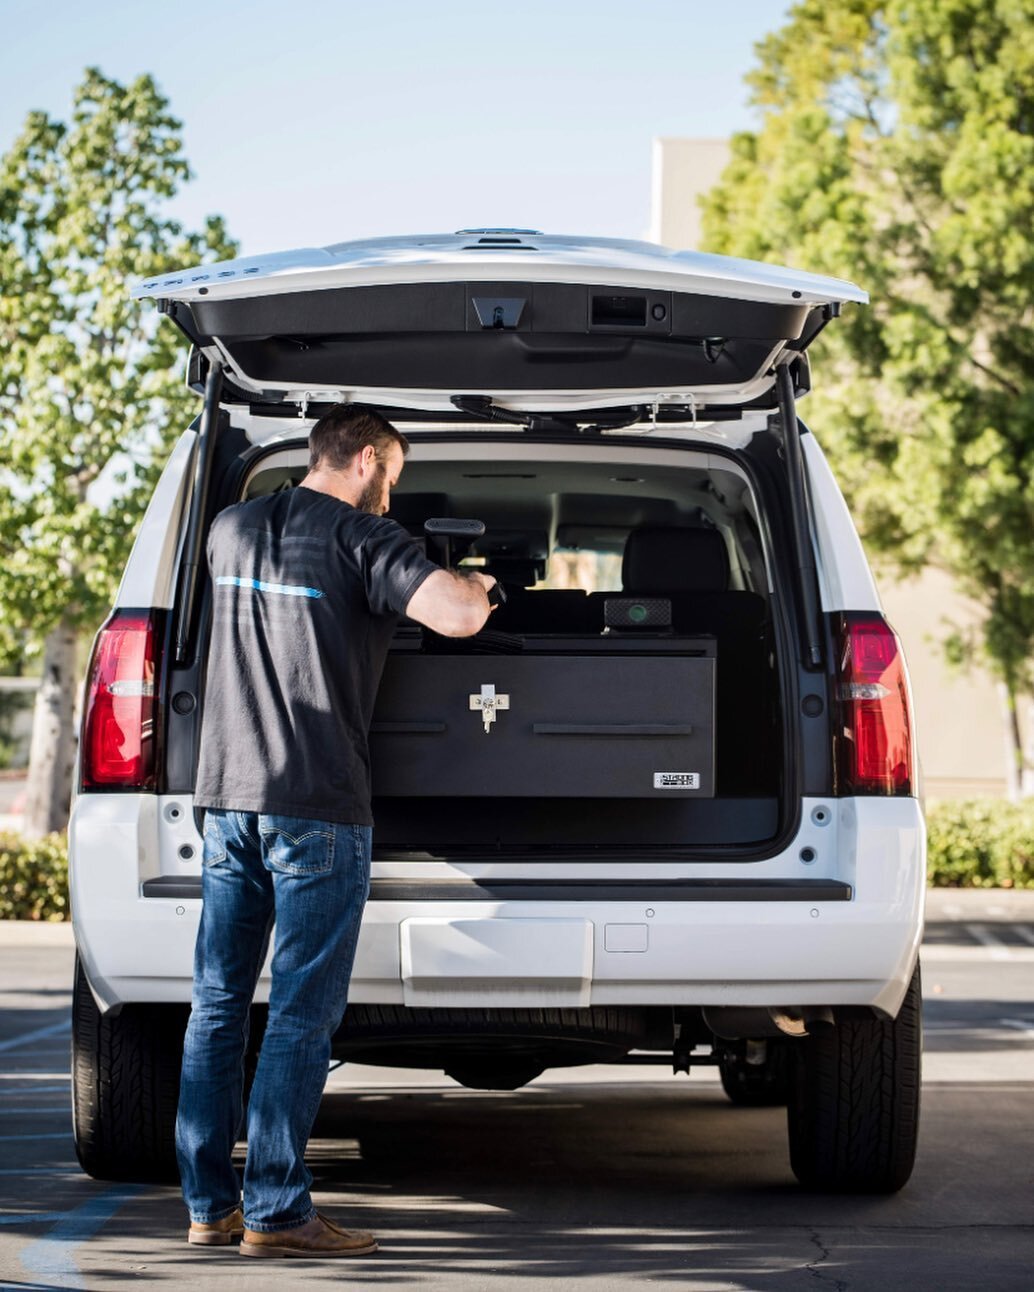 Getting out big box loaded up in a Tahoe. #BuiltToSecure #MadeInAmerica